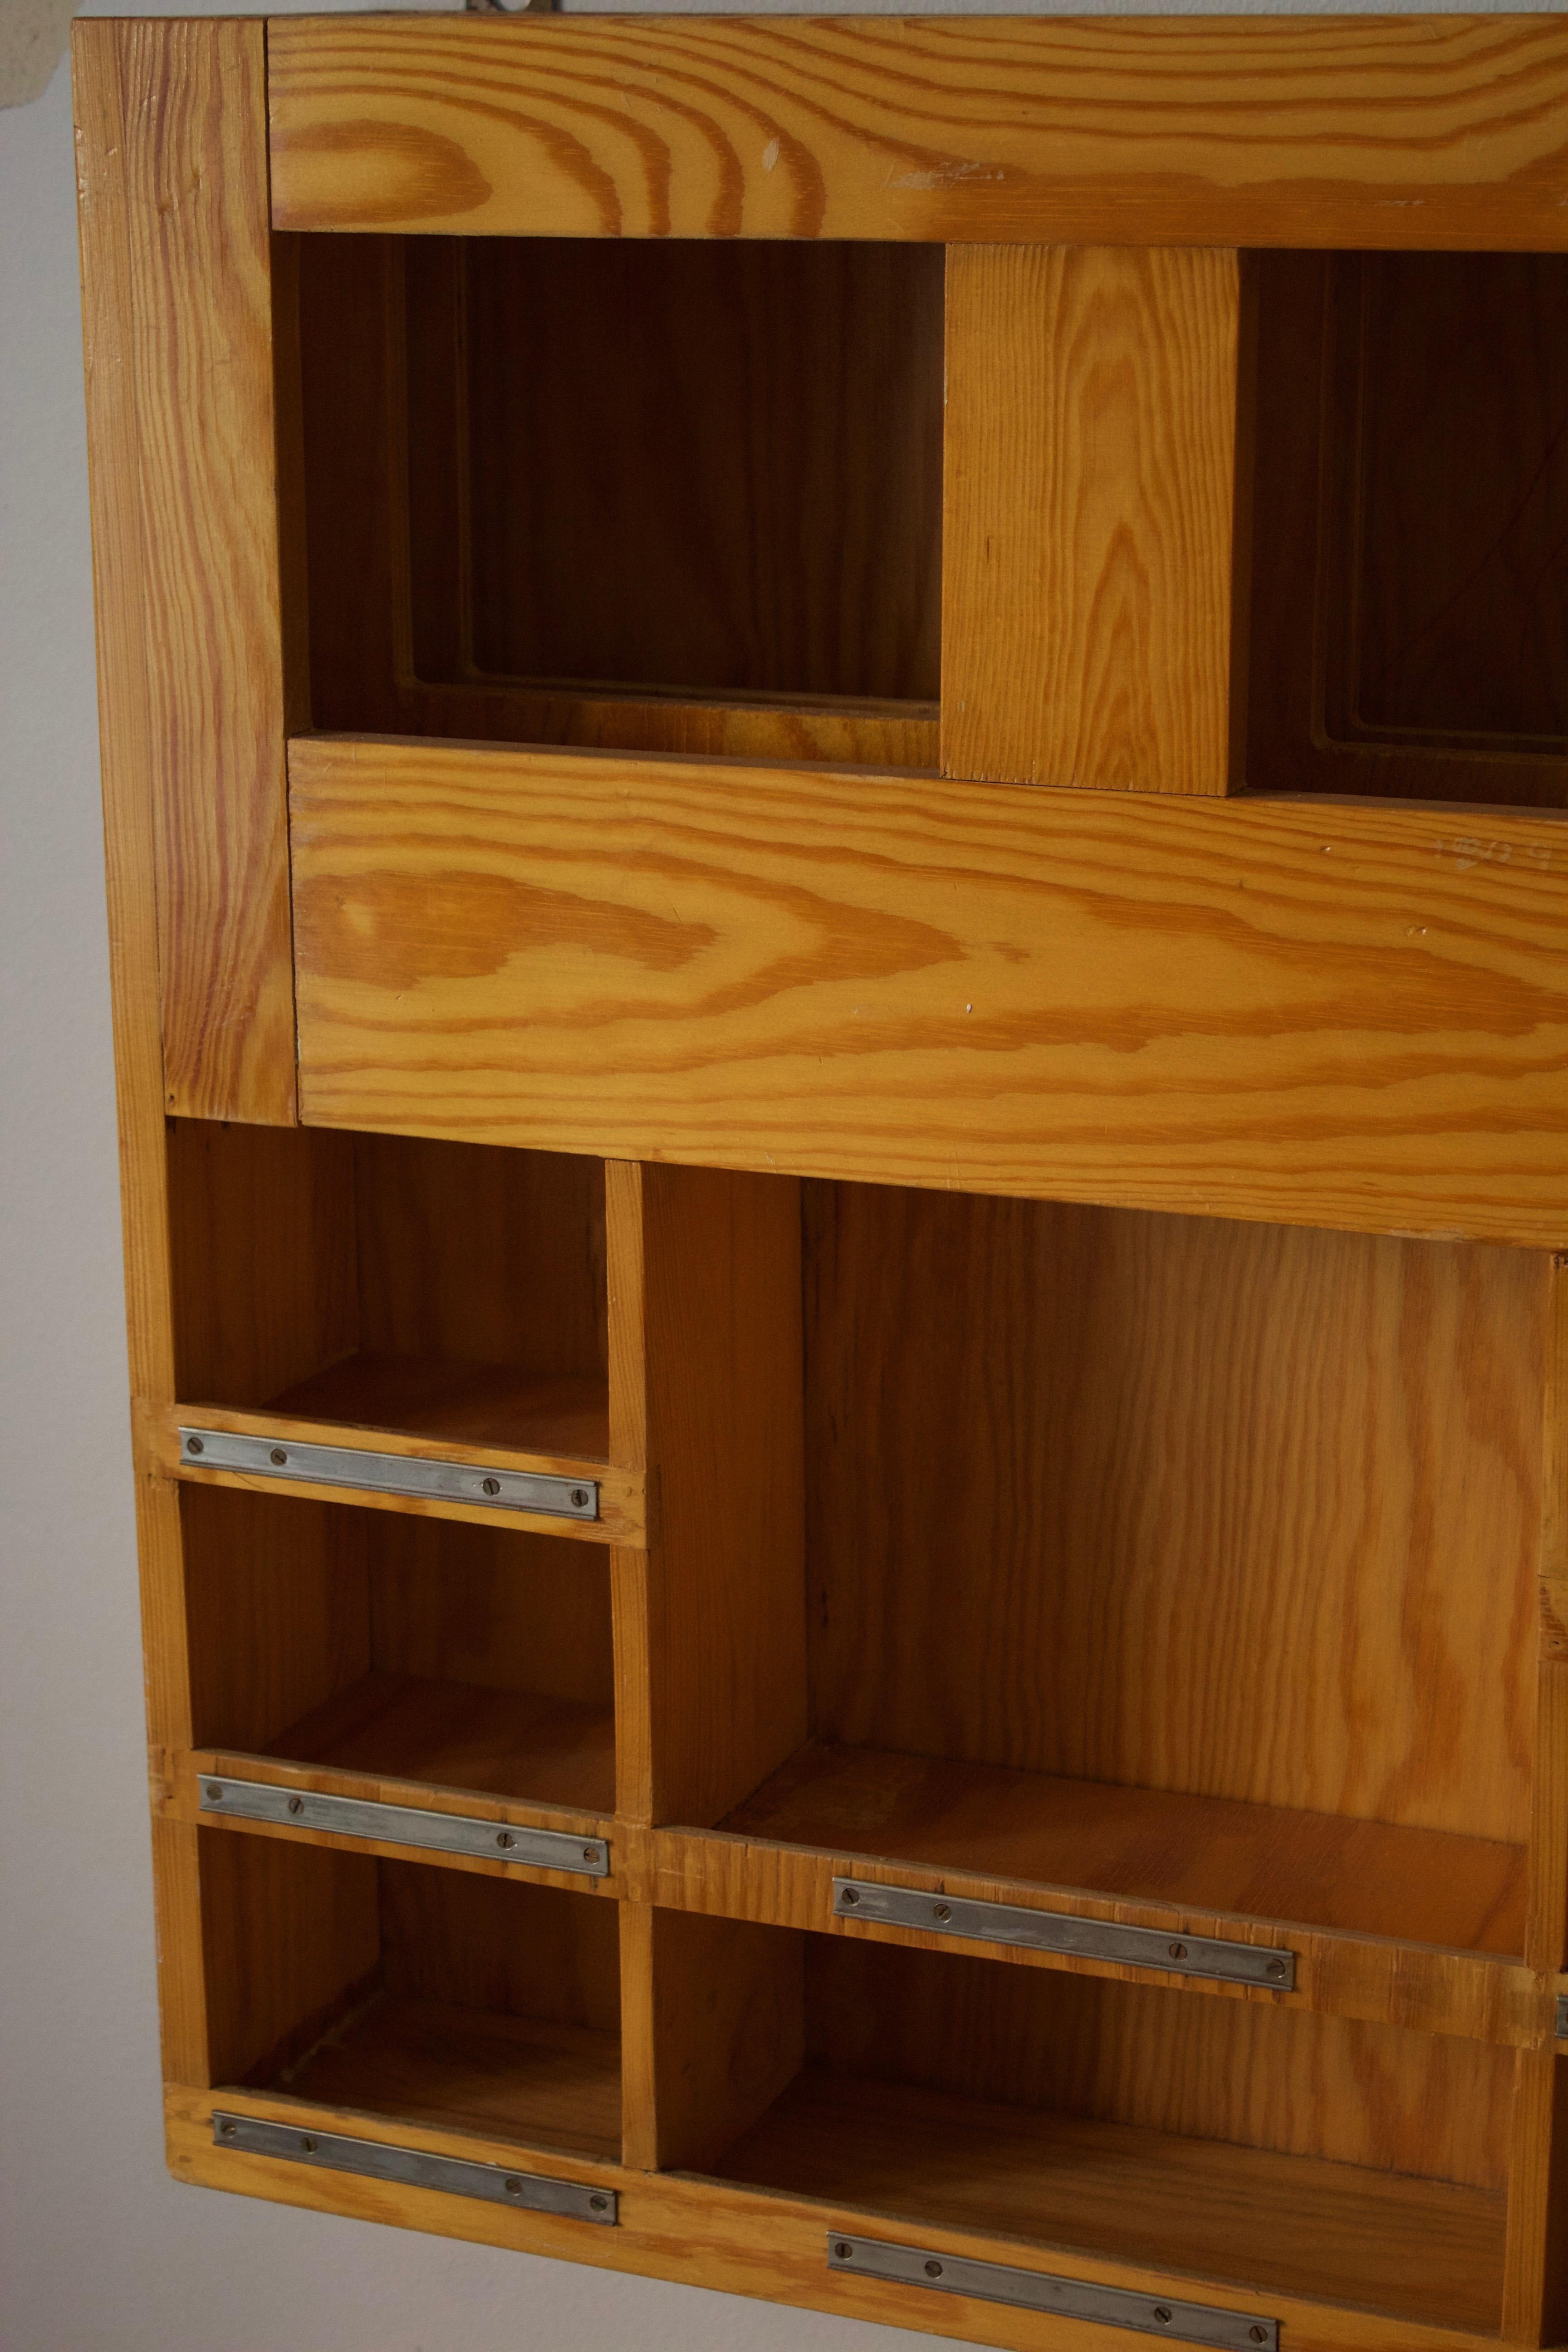 A wall mounted magazine rack with shelves. Features display shelves and magazine storage.
  
  